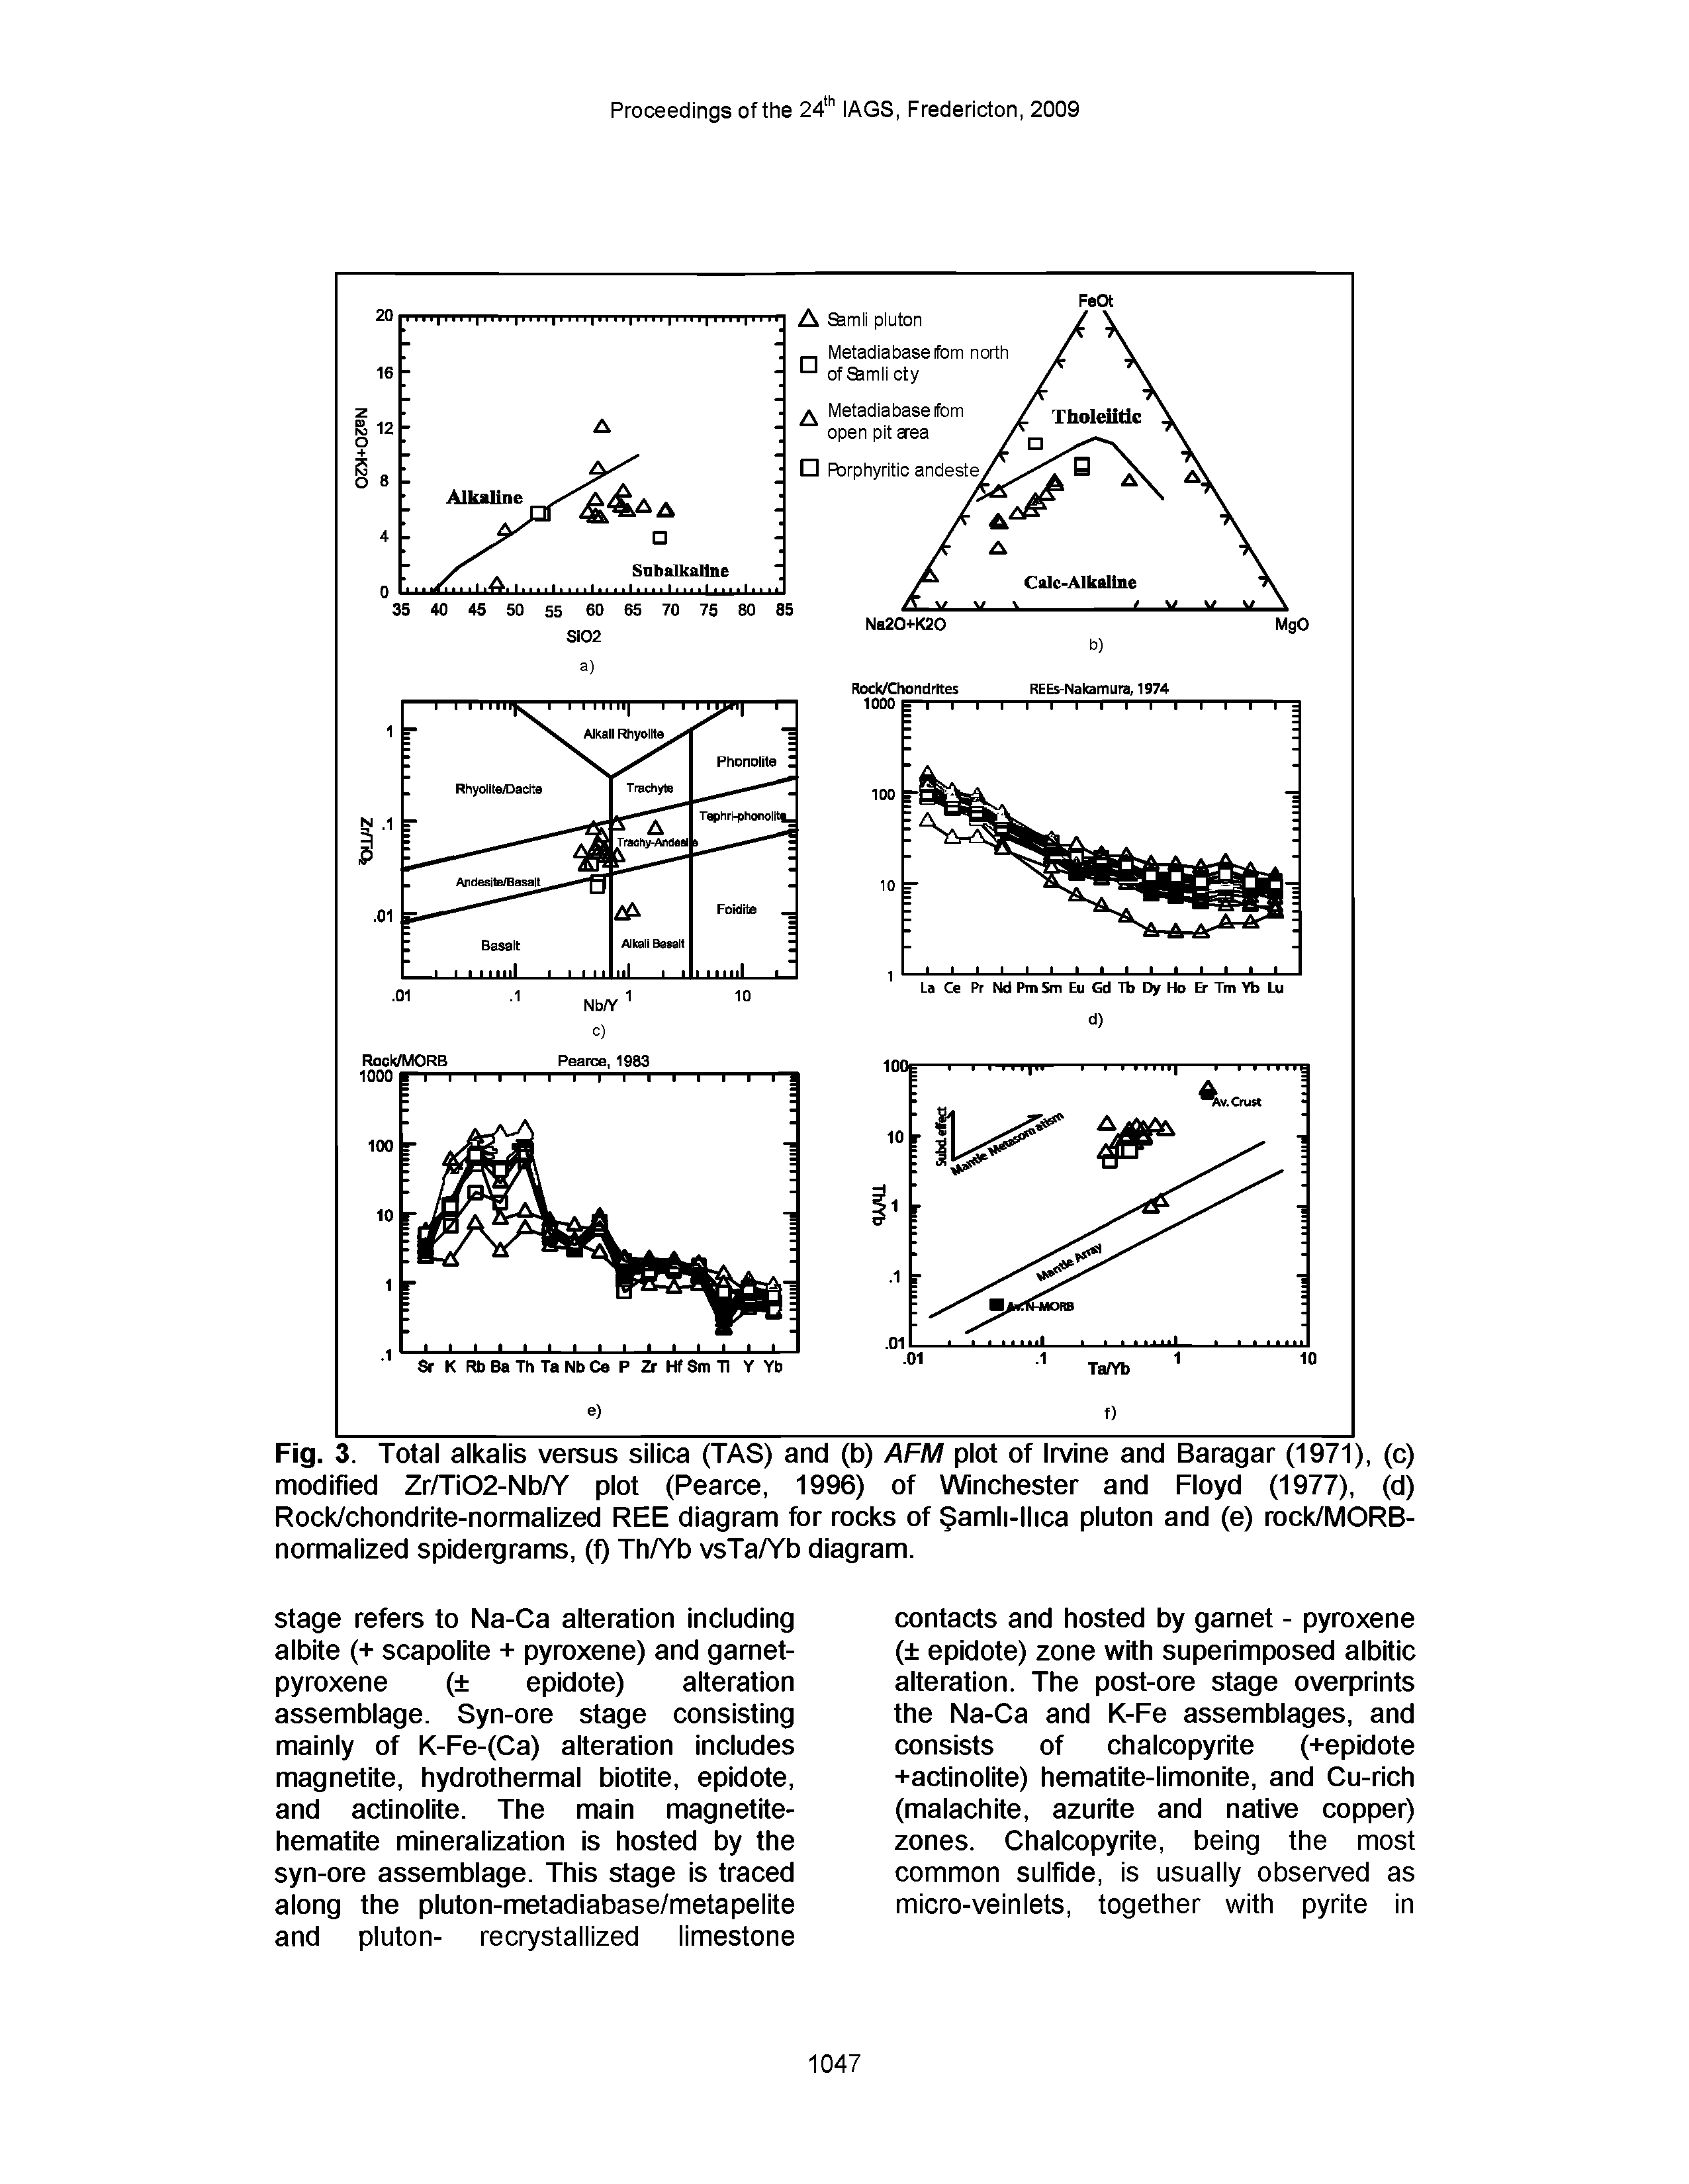 Fig. 3. Total alkalis versus silica (TAS) and (b) AFM plot of Irvine and Baragar (1971), (c) modified Zr/Ti02-Nb/Y plot (Pearce, 1996) of Winchester and Floyd (1977), (d) Rock/chondrite-normalized REE diagram for rocks of amli-llica pluton and (e) rock/MORB-normalized spidergrams, (f) Th/Yb vsTa/Yb diagram.